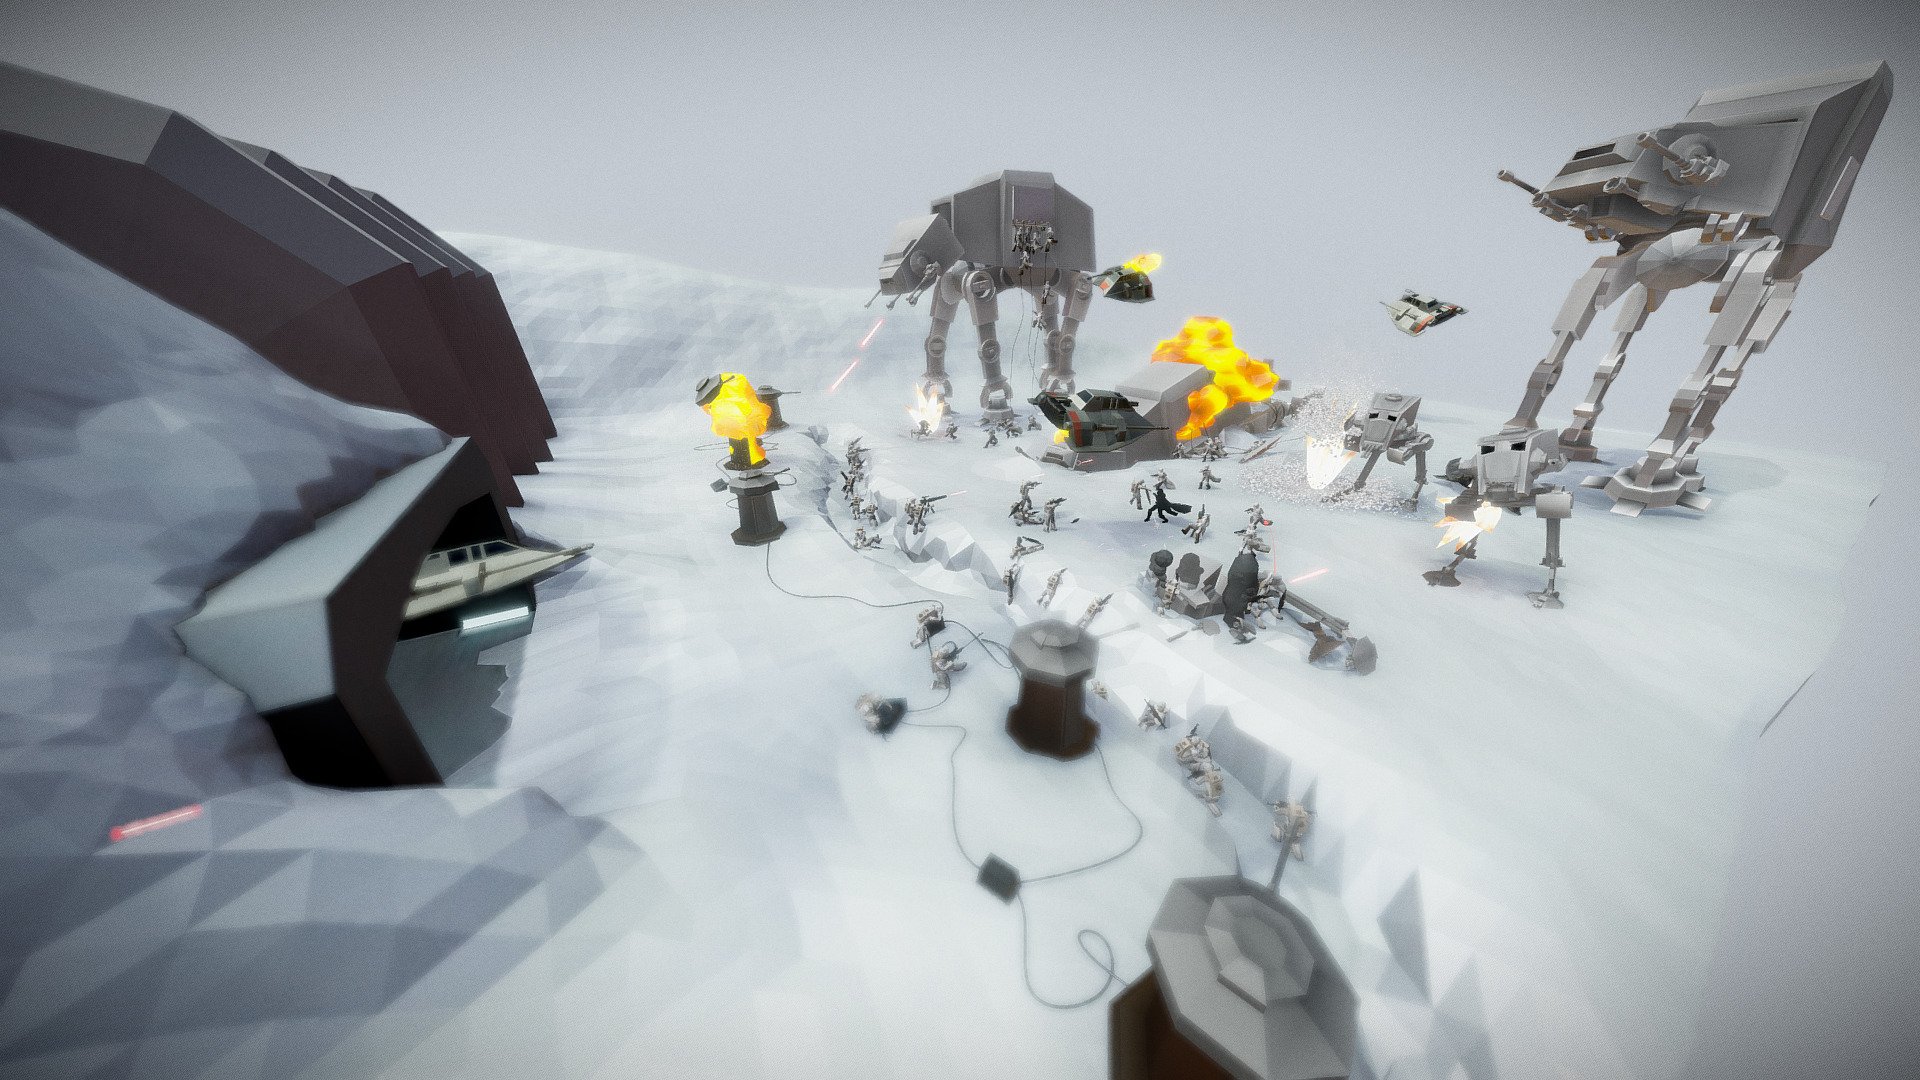 I’m proud to finally present a project I’ve been working on since 2015: A diorama scene depicting the Battle of Hoth from &ldquo;Star Wars Episode V: The Empire Strikes Back